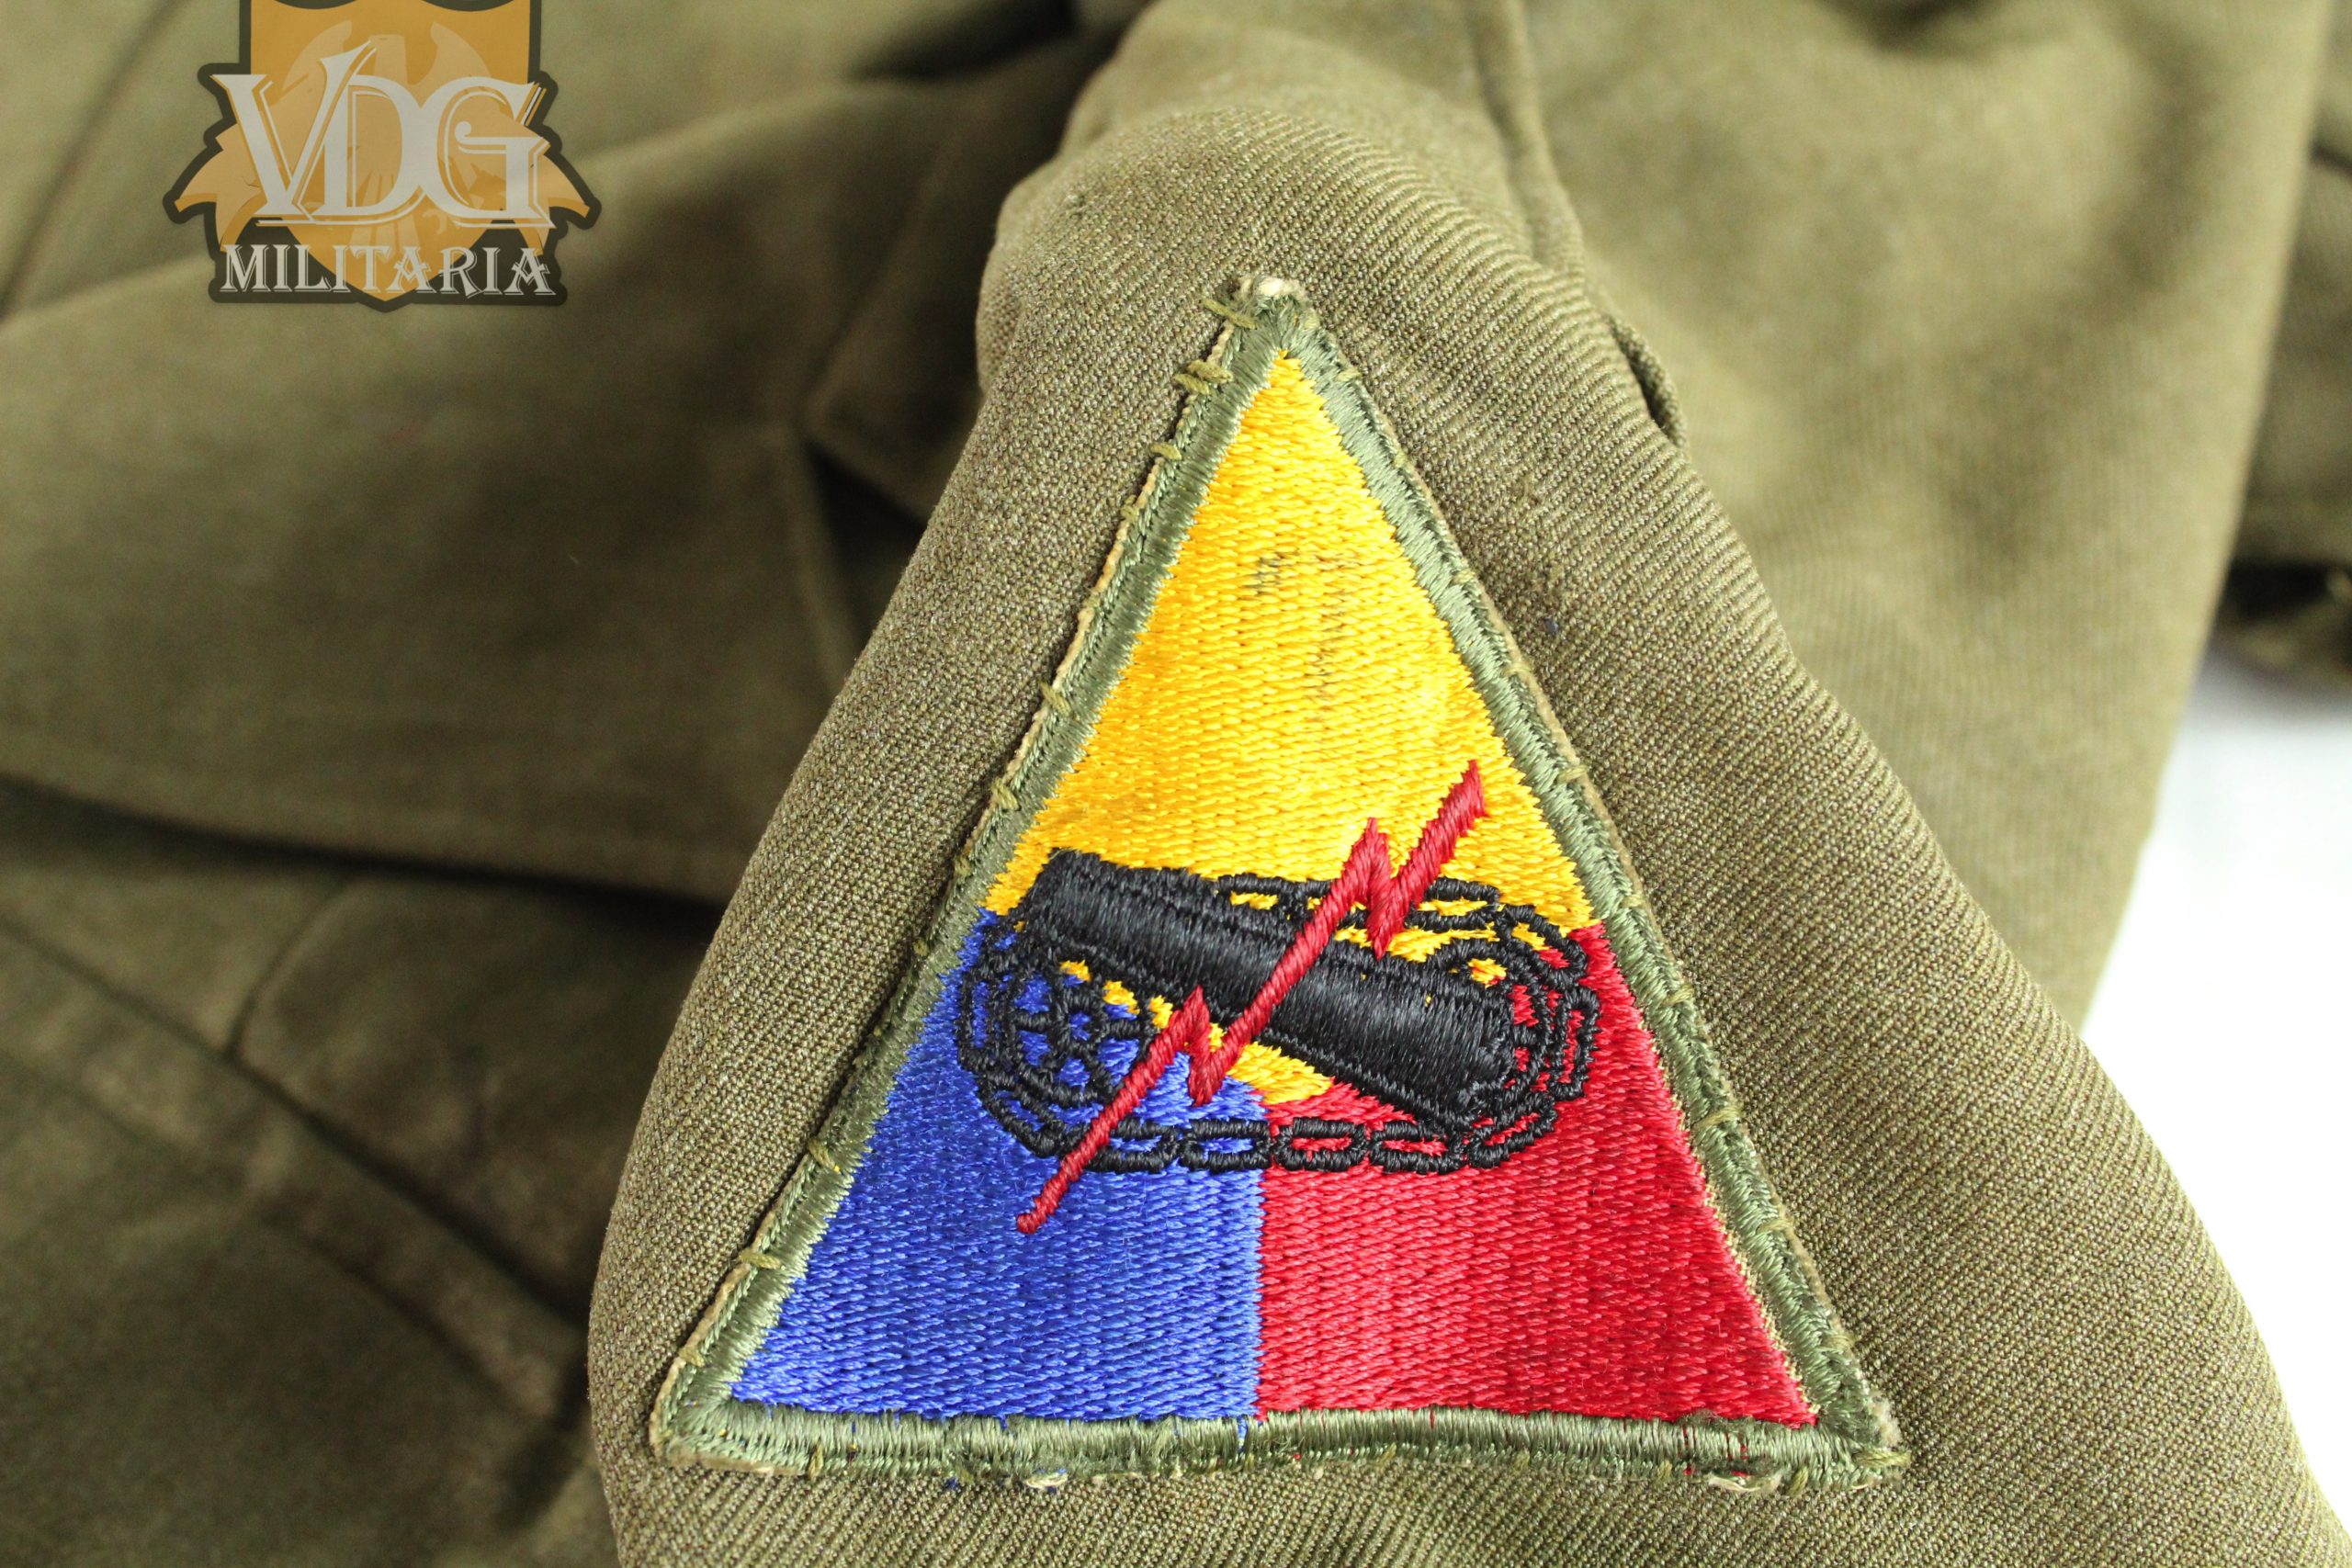 ww2 jacket army ike 7th armored 39r sgt division tunic